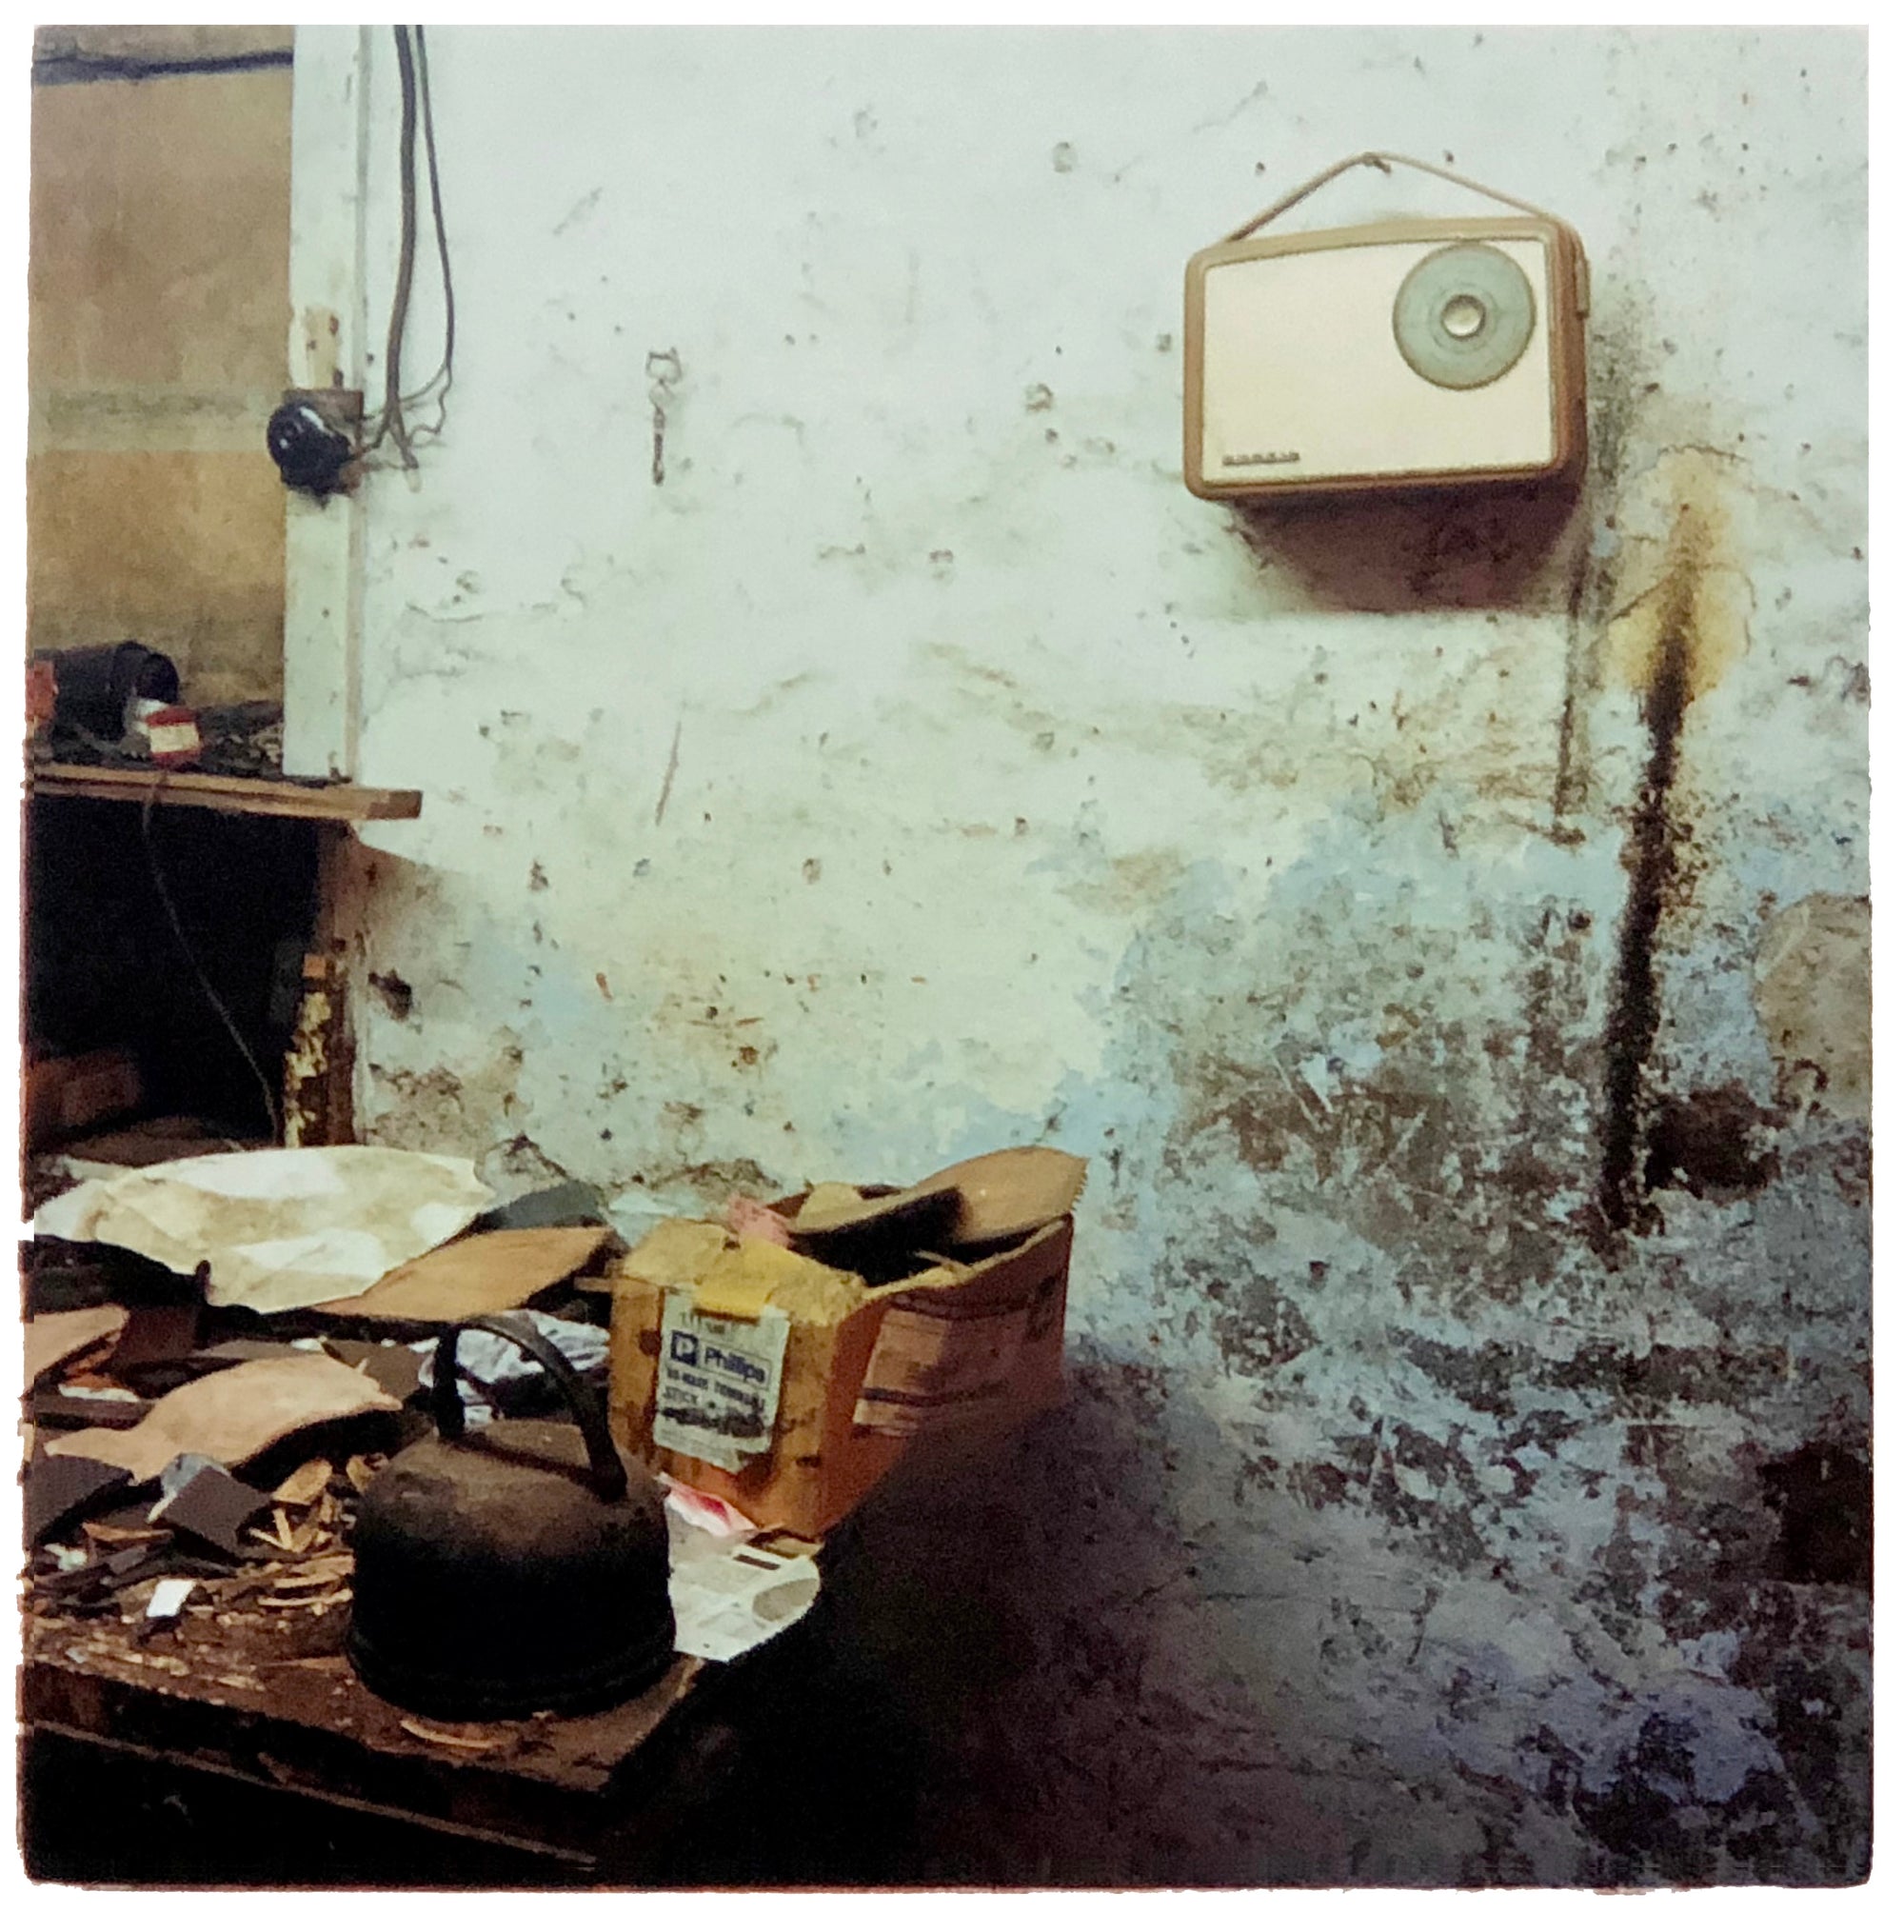 A vintage radio hangs on the wall in a dilapidated room.